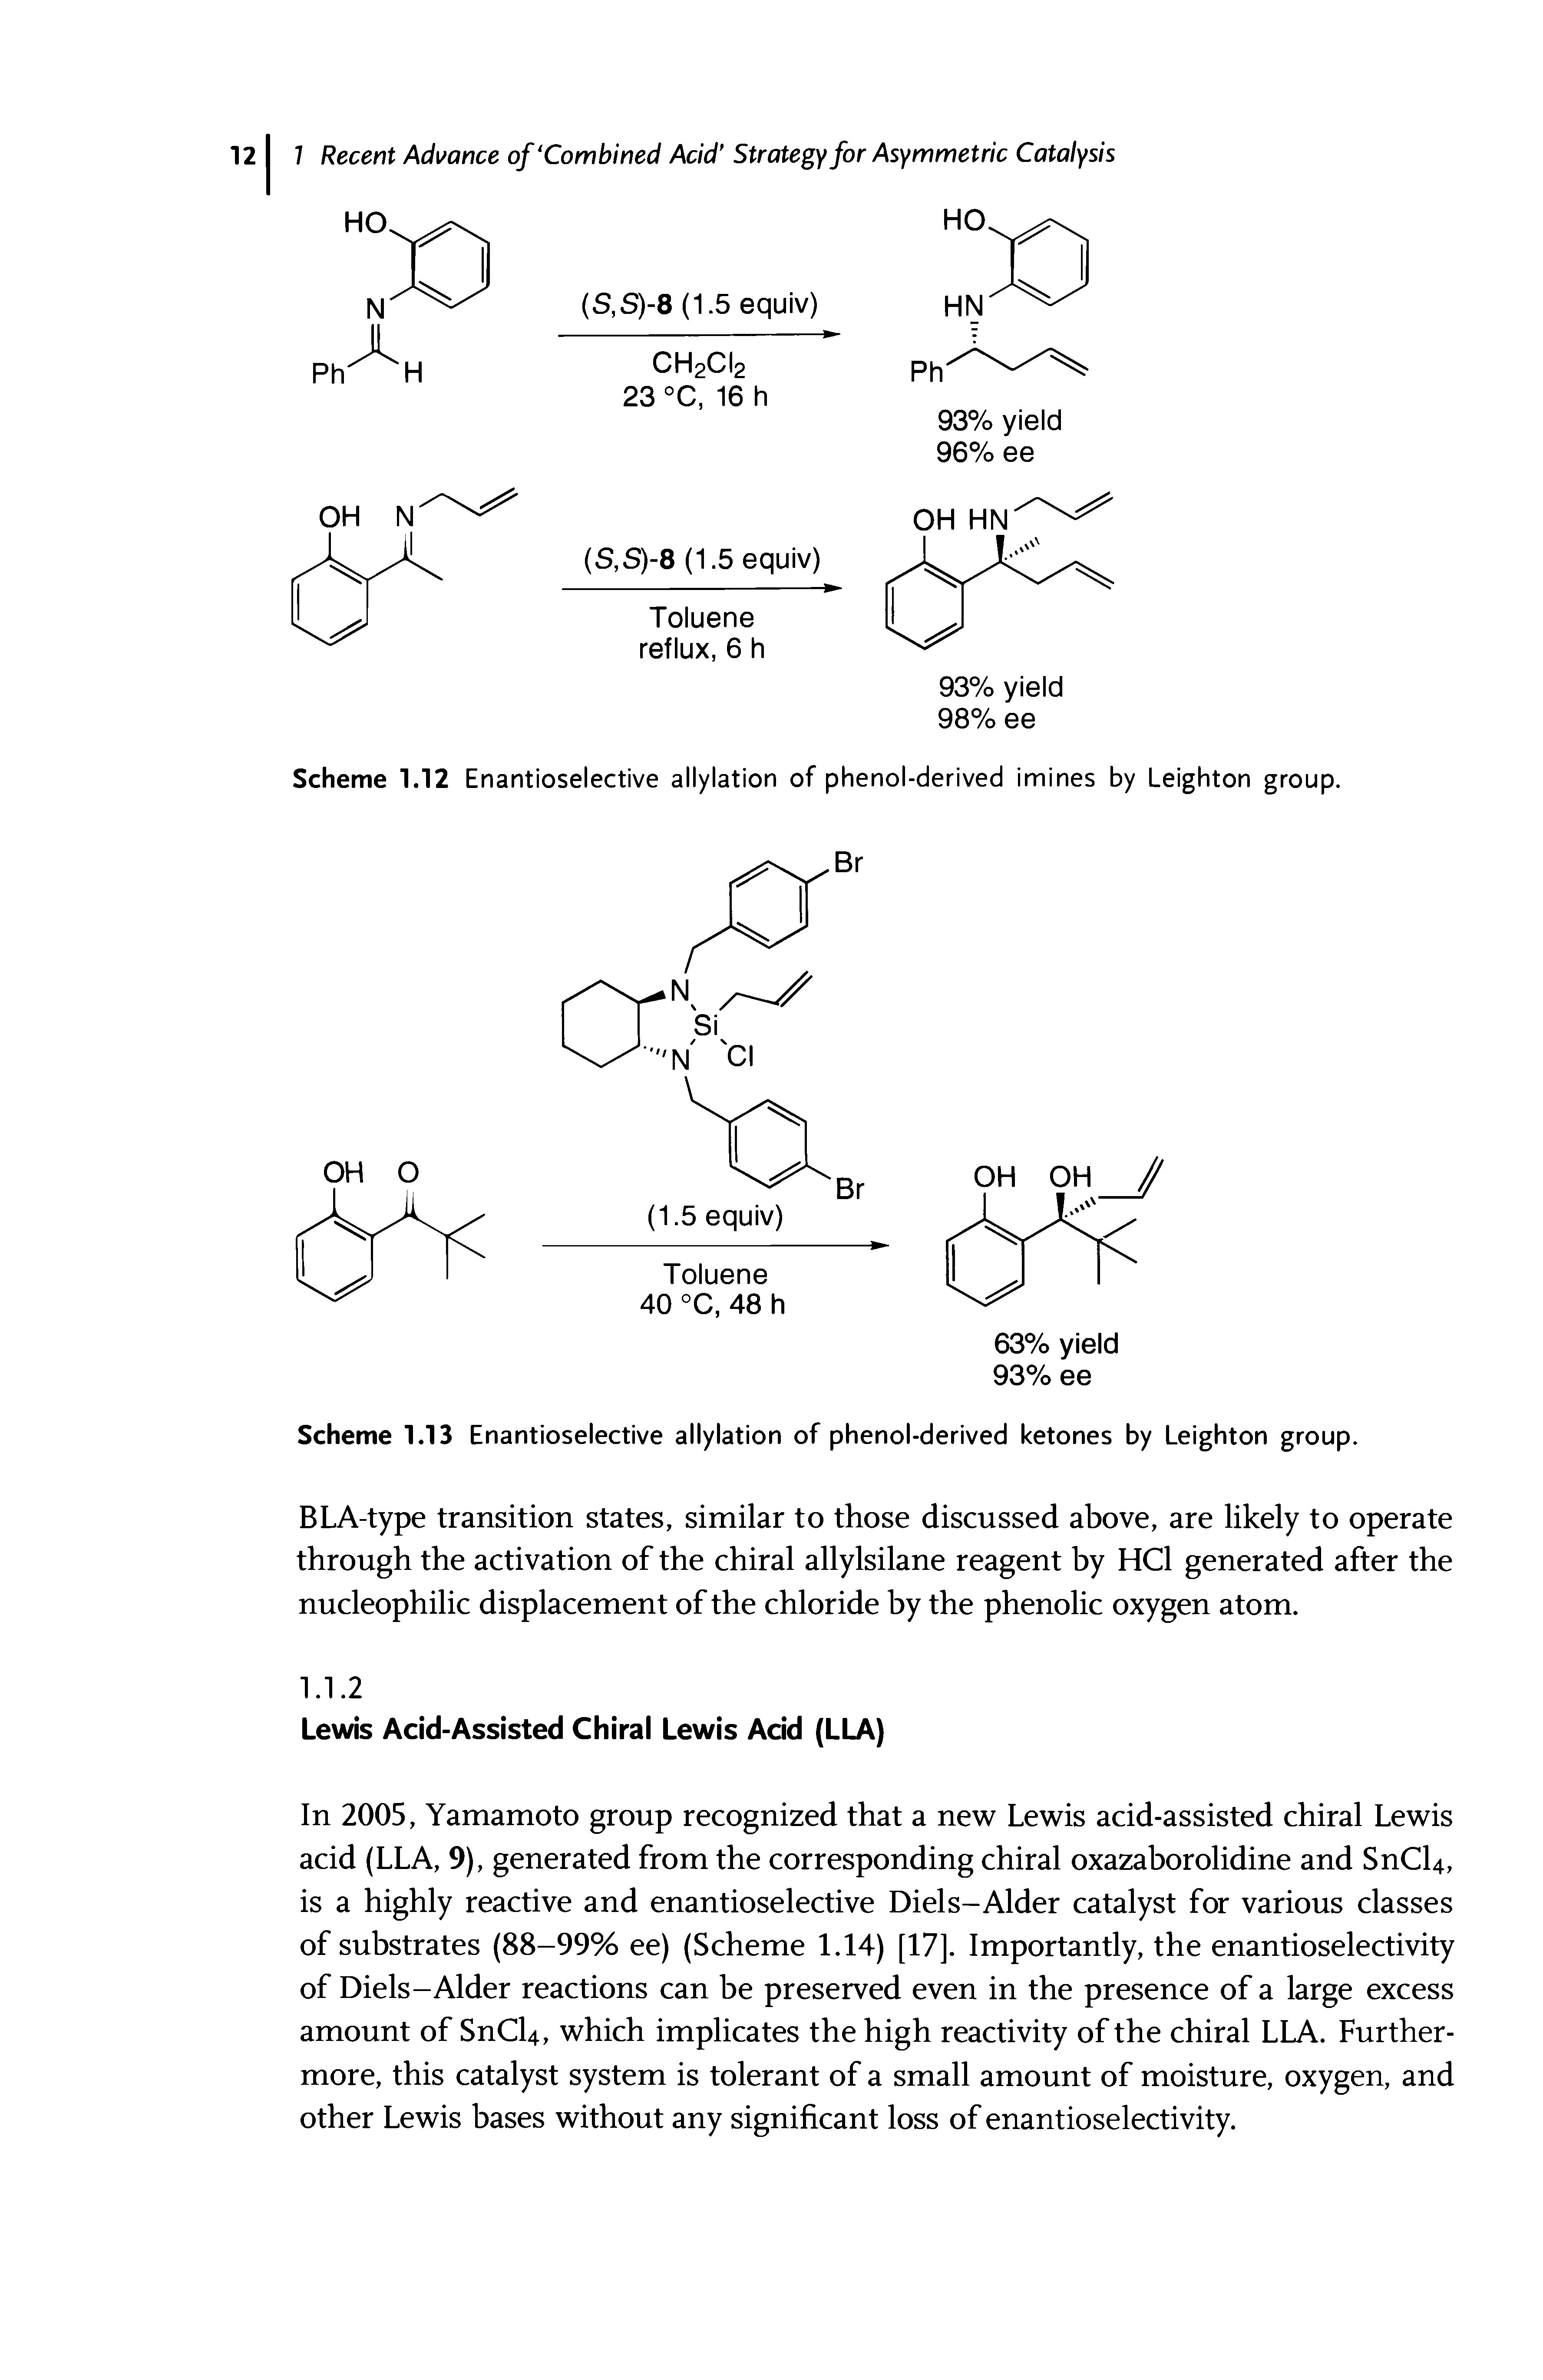 Scheme 1.12 Enantioselective allylation of phenol-derived imines by Leighton group.